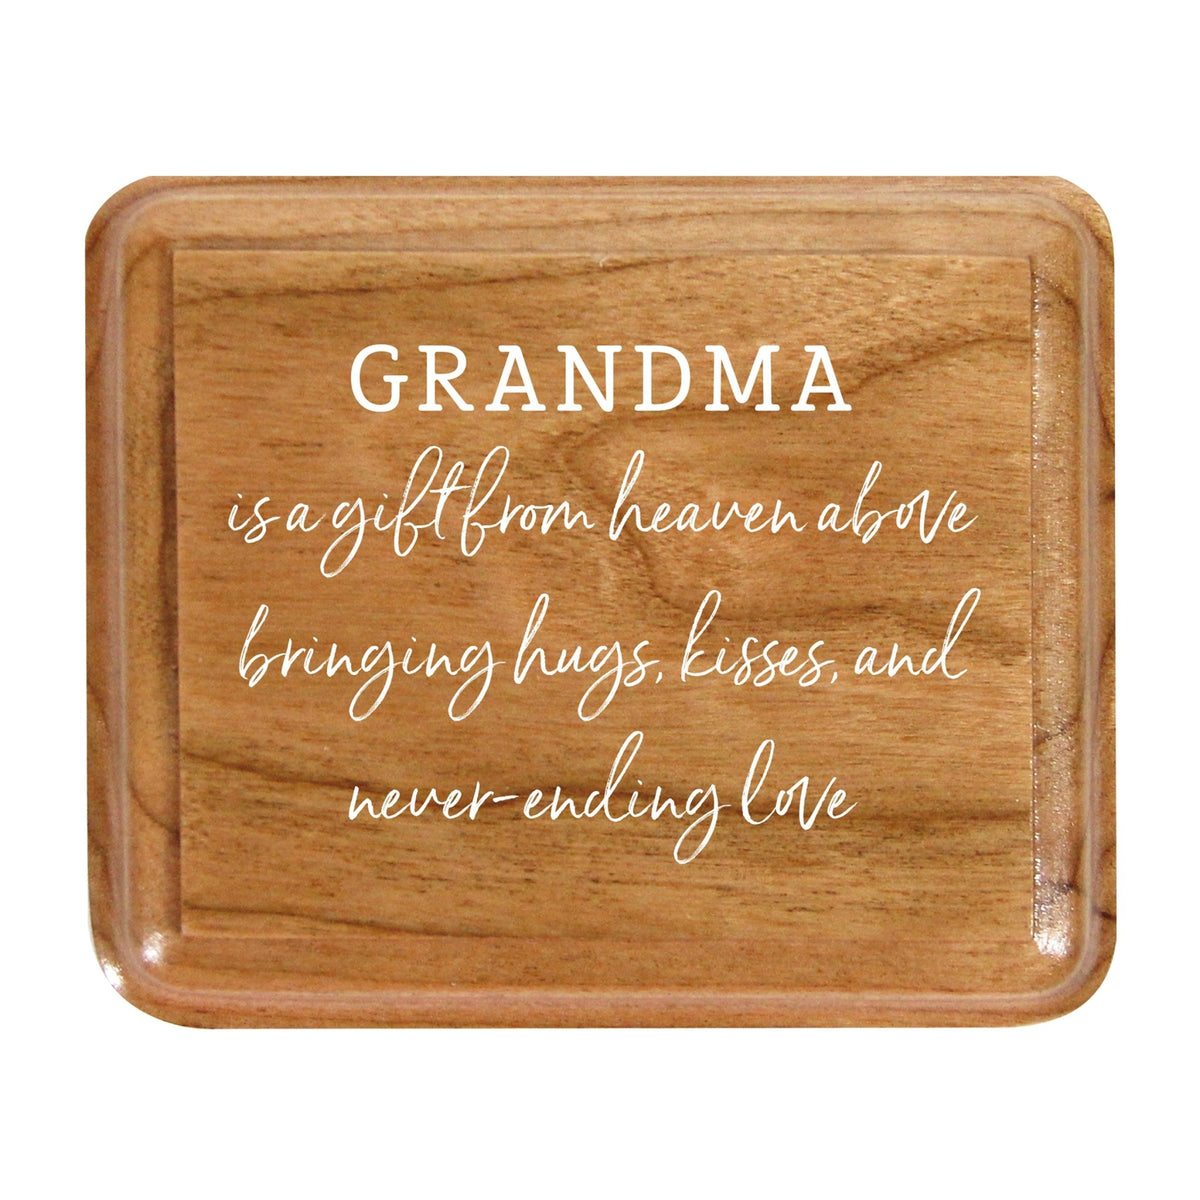 Modern Keepsake Box Inspirational Quotes for Grandmother 3.5x3 Grandmother Is A Gift - LifeSong Milestones